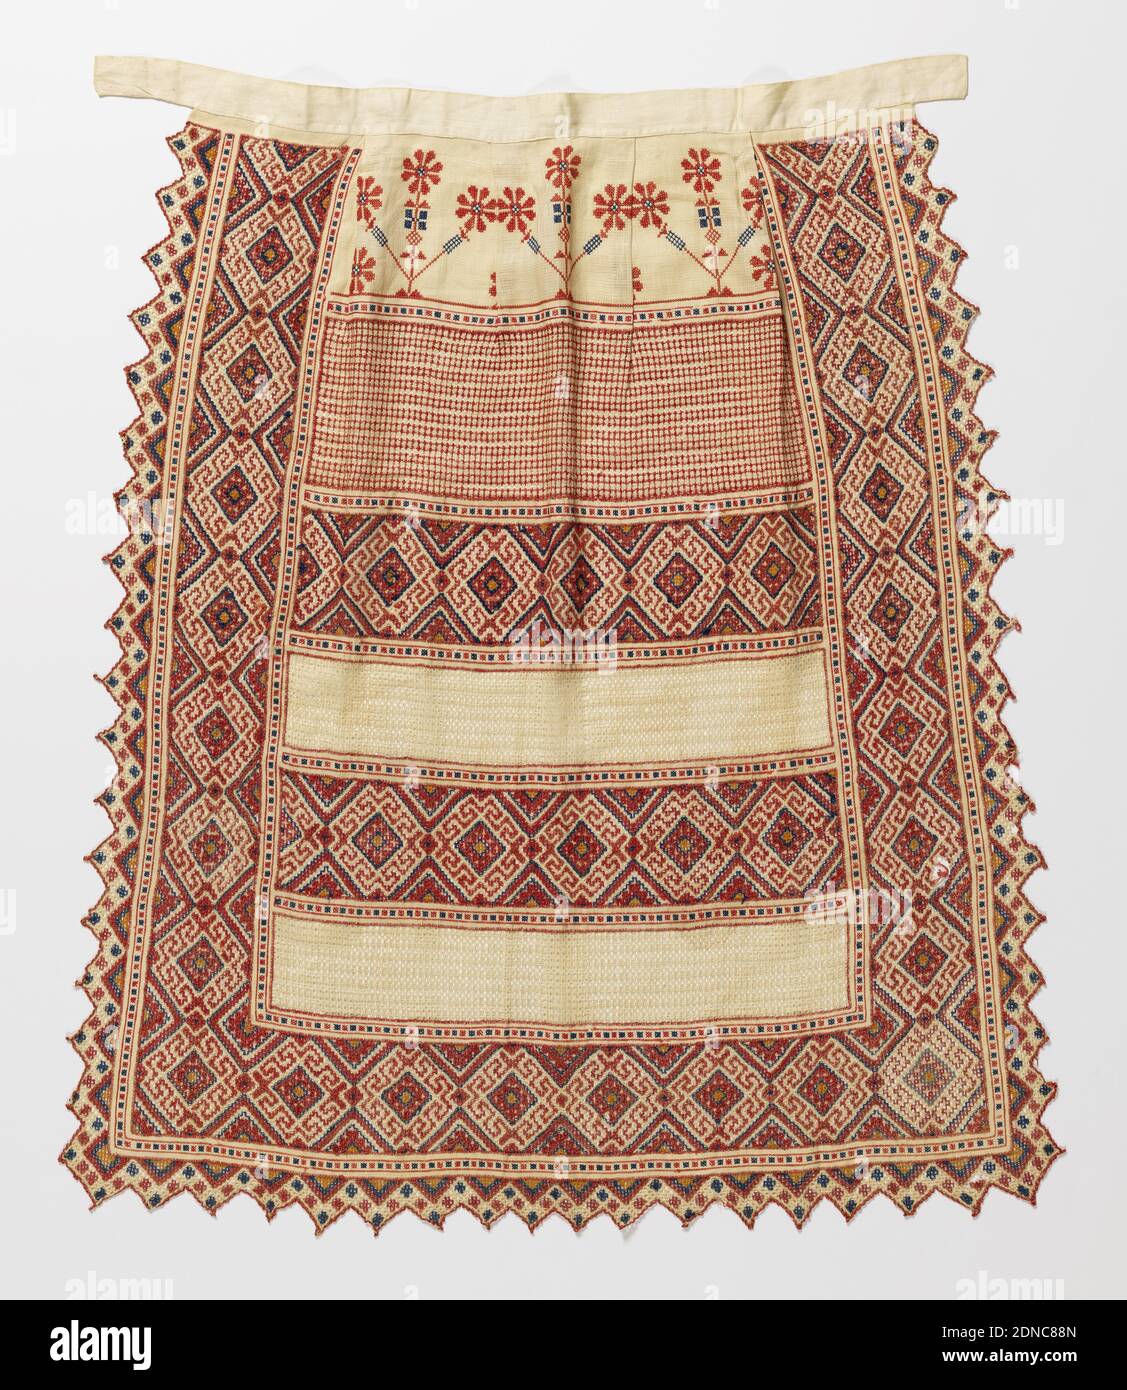 Apron, Medium: linen, cotton Technique: withdrawn element with embroidery, White linen apron with drawnwork and embroidery in colored cotton., Russia, 19th century, costume & accessories, Apron Stock Photo